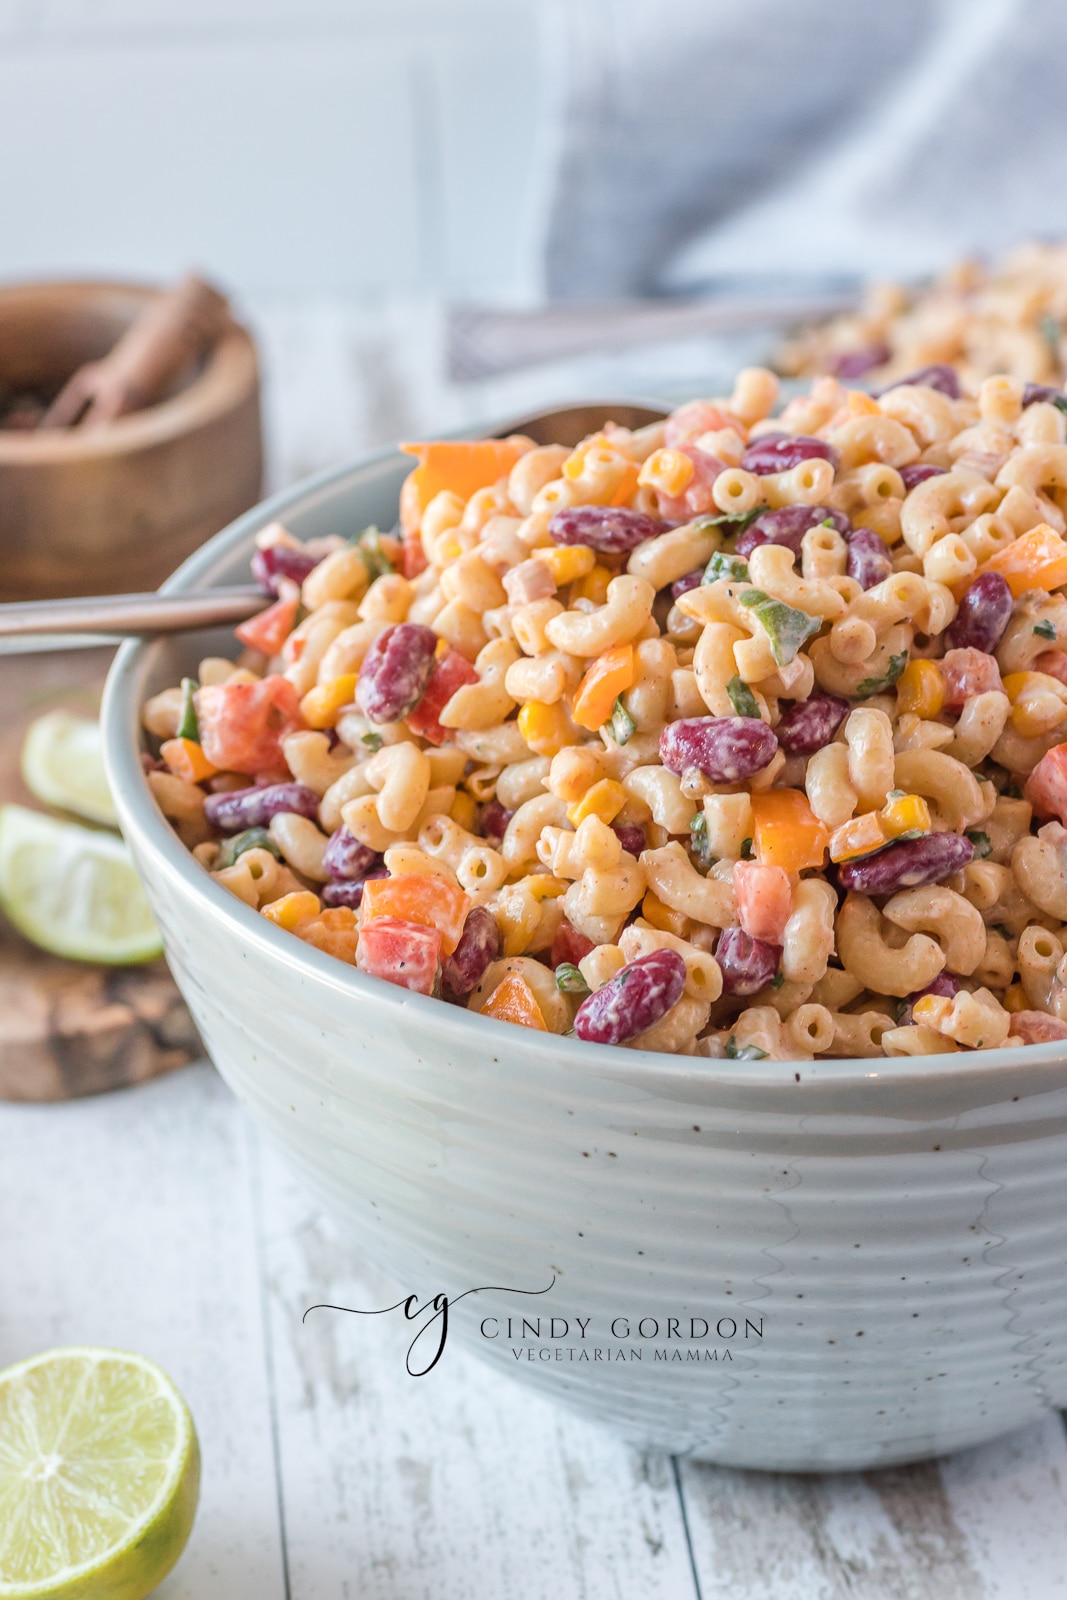 blue bowl filled with creamy macaroni salad with red, purple and green vegetables in it